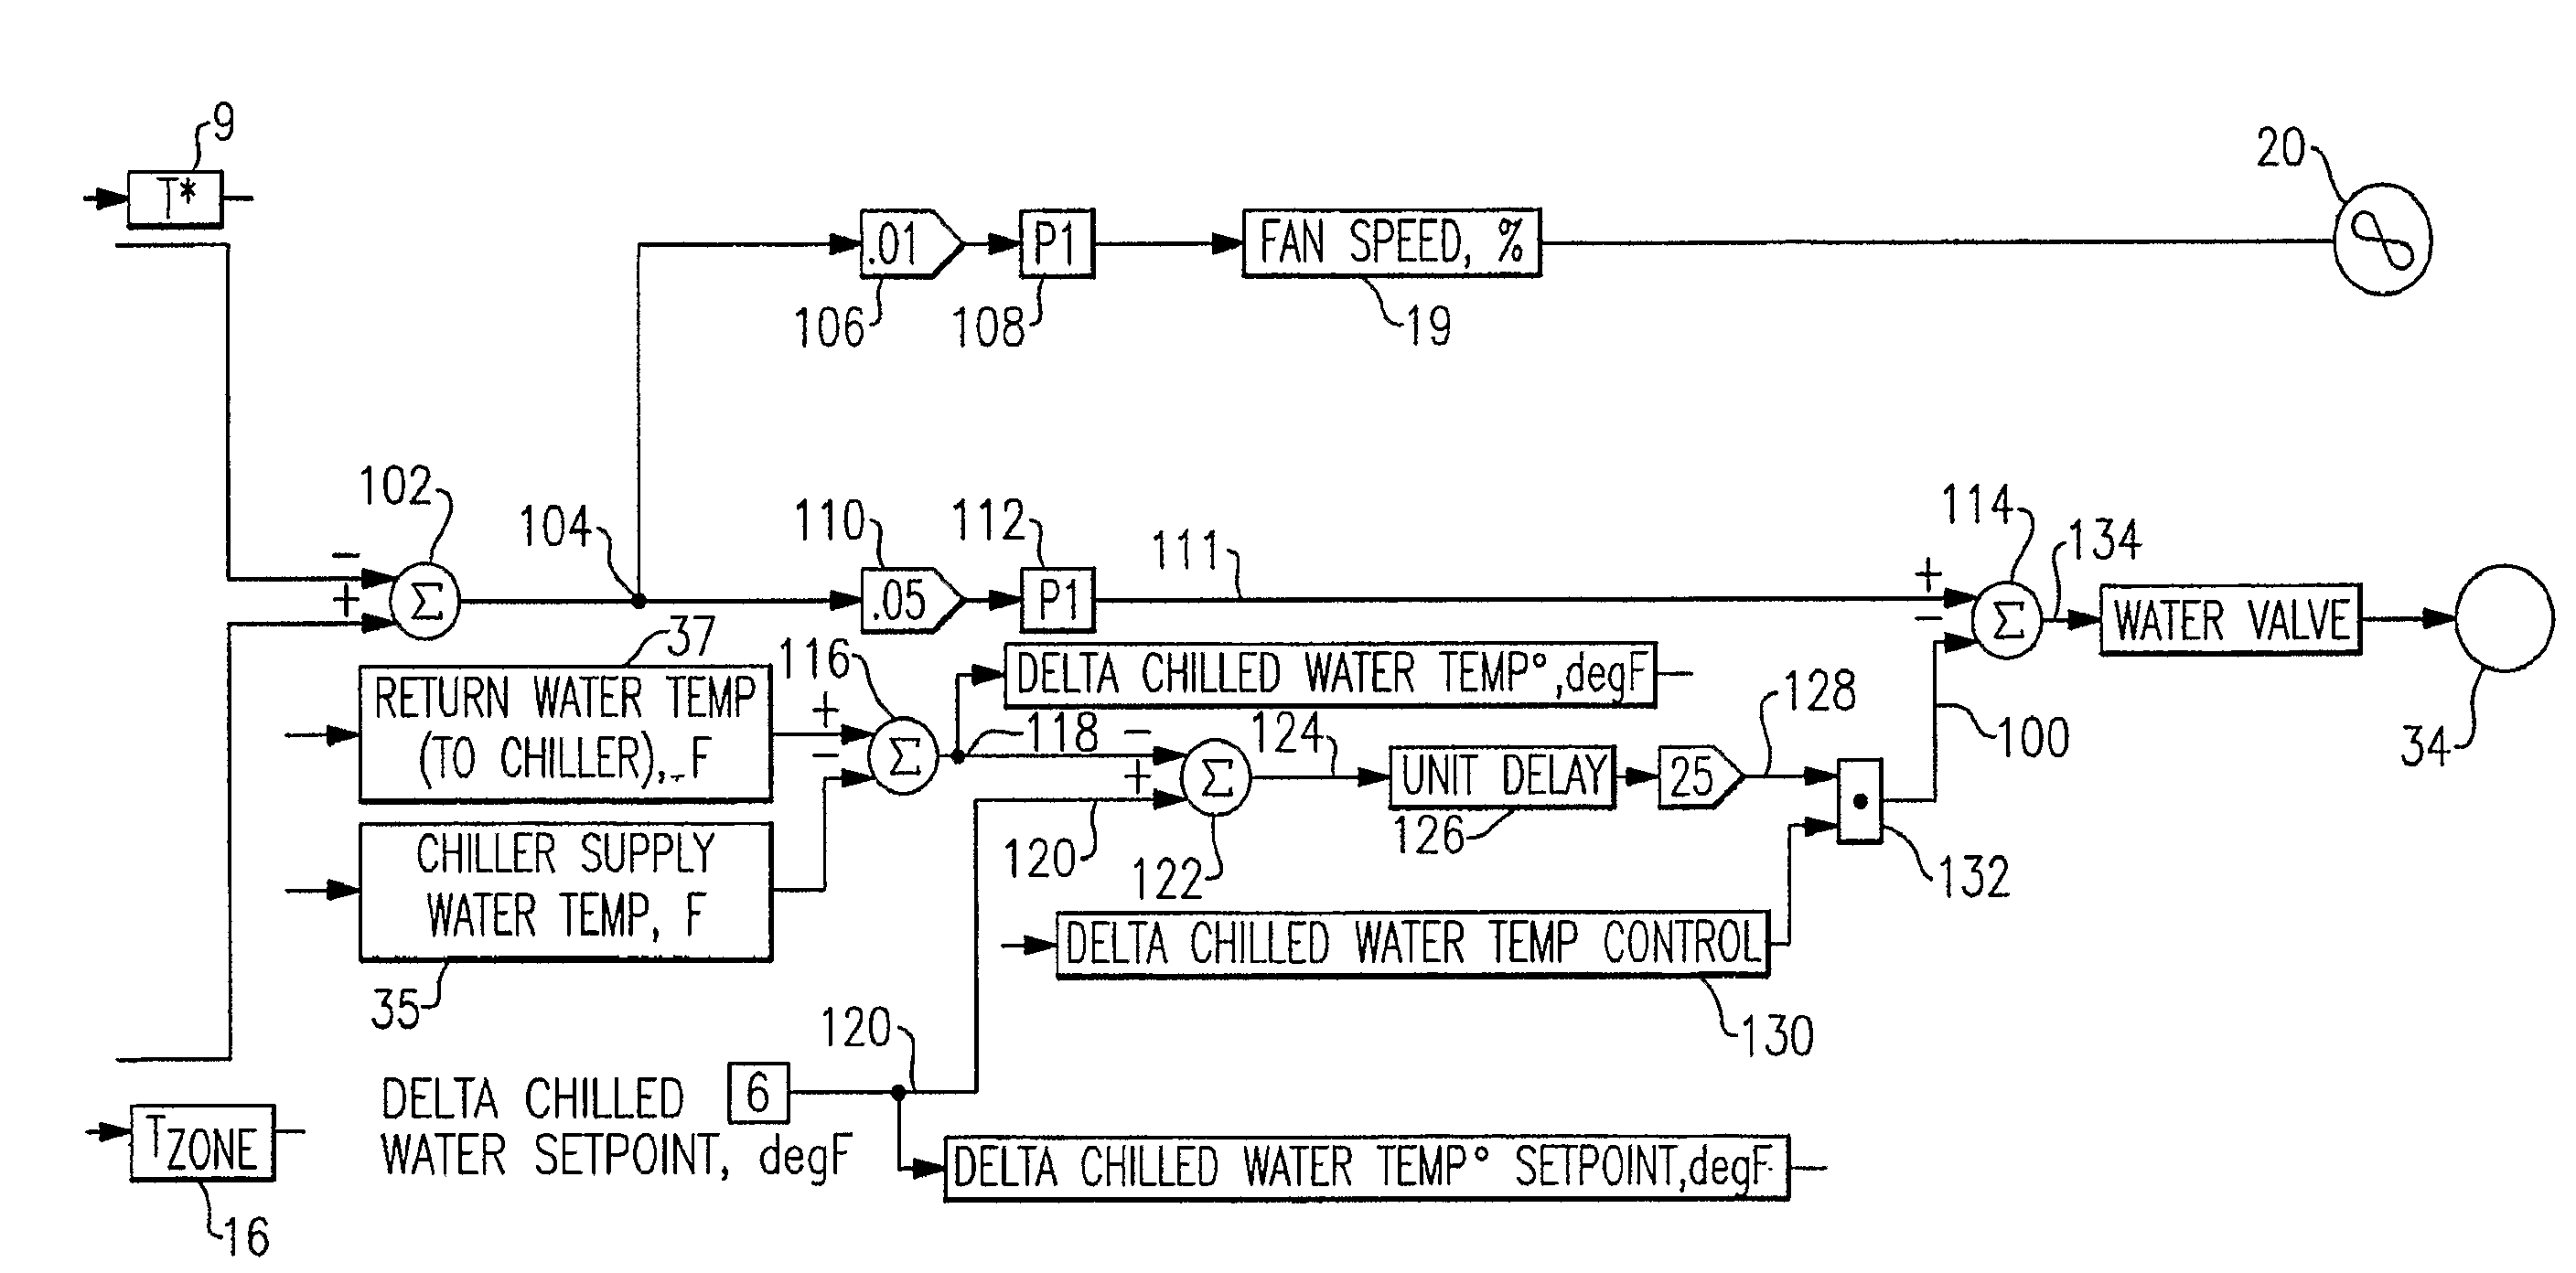 Air-conditioning control algorithm employing air and fluid inputs